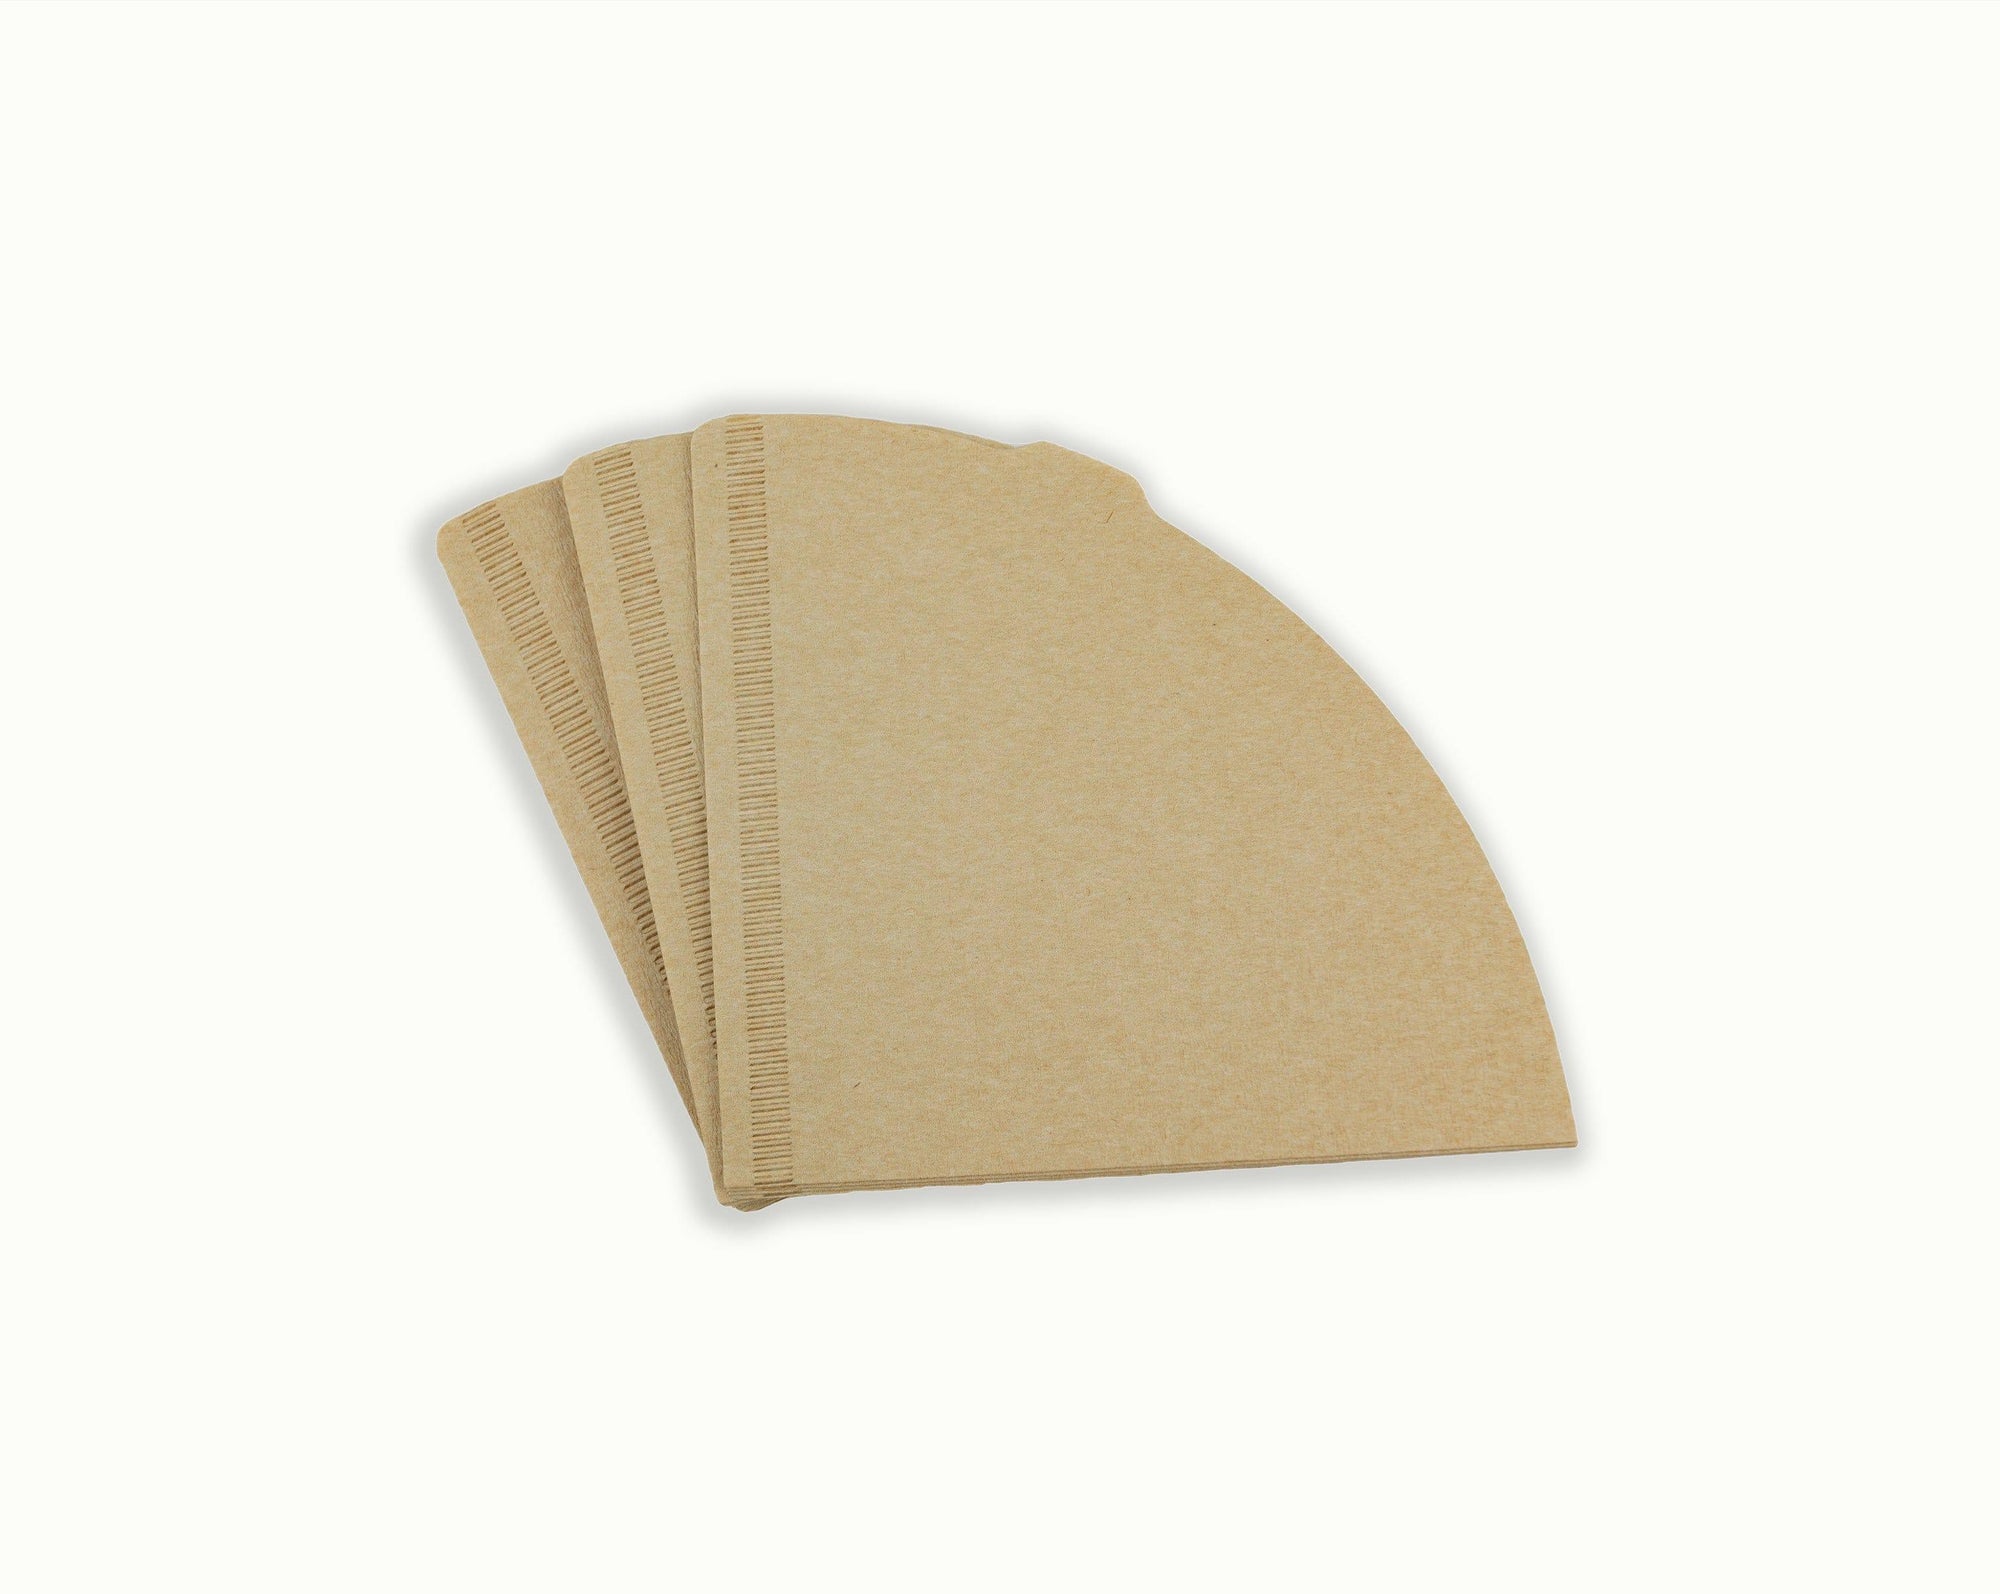 A package of 100 pc. V60-02 coffee paper filters